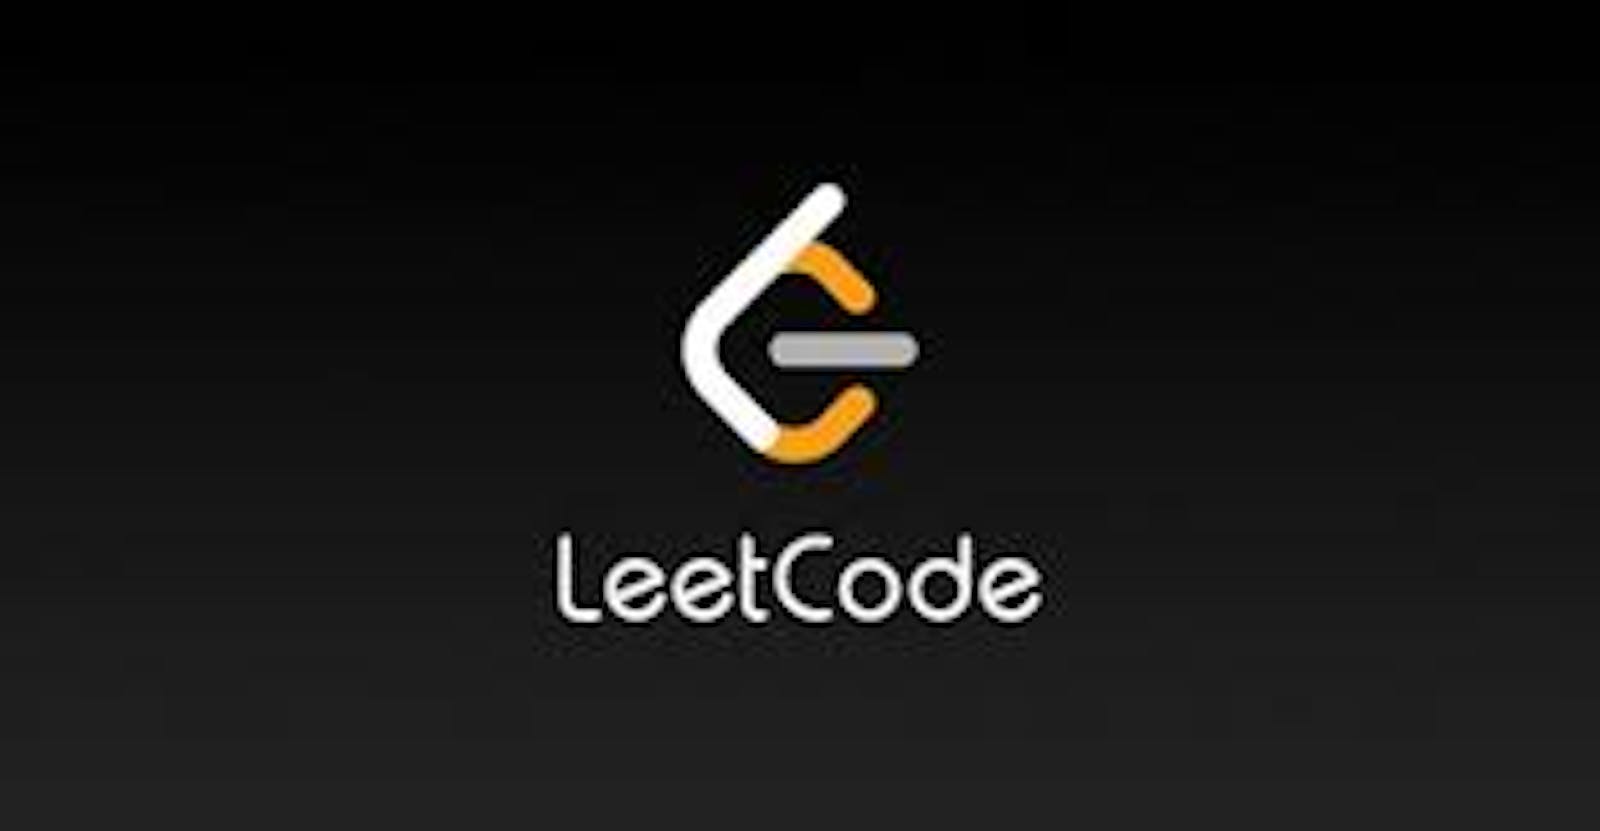 Why Leetcode is Important?